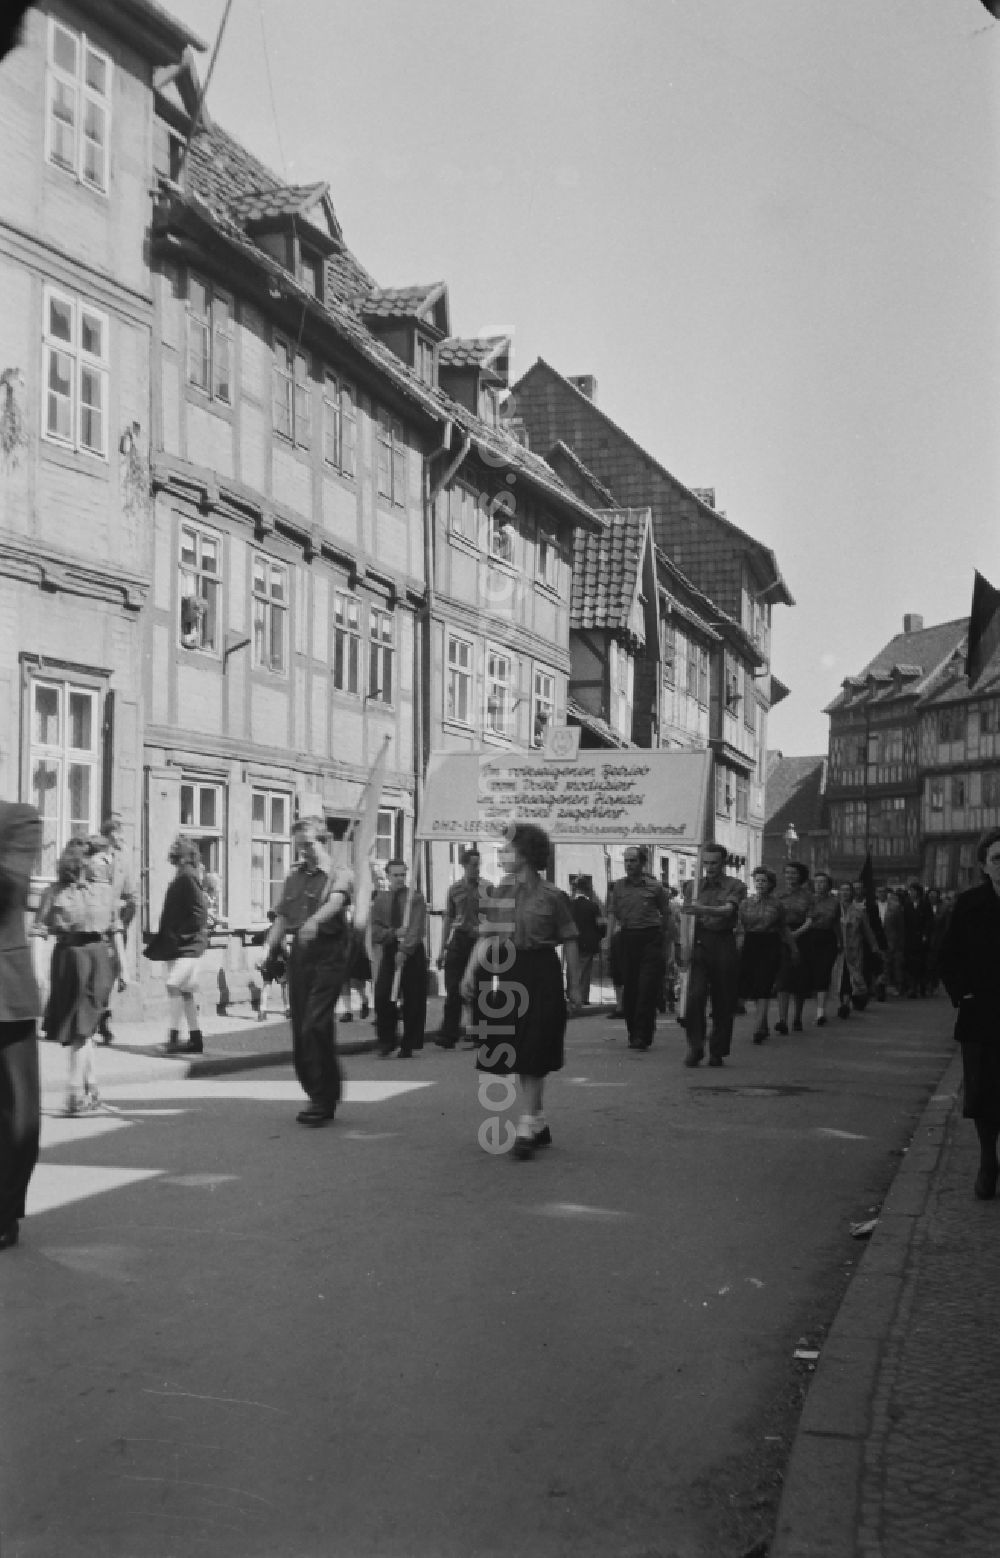 GDR photo archive: Halberstadt - Young members of the FDJ (Free German Youth) as march participants in the demonstration for the holiday of May 1st on the Johannesbrunnen on the streets of the city center in Halberstadt in the state of Saxony-Anhalt in the area of the former GDR, German Democratic Republic